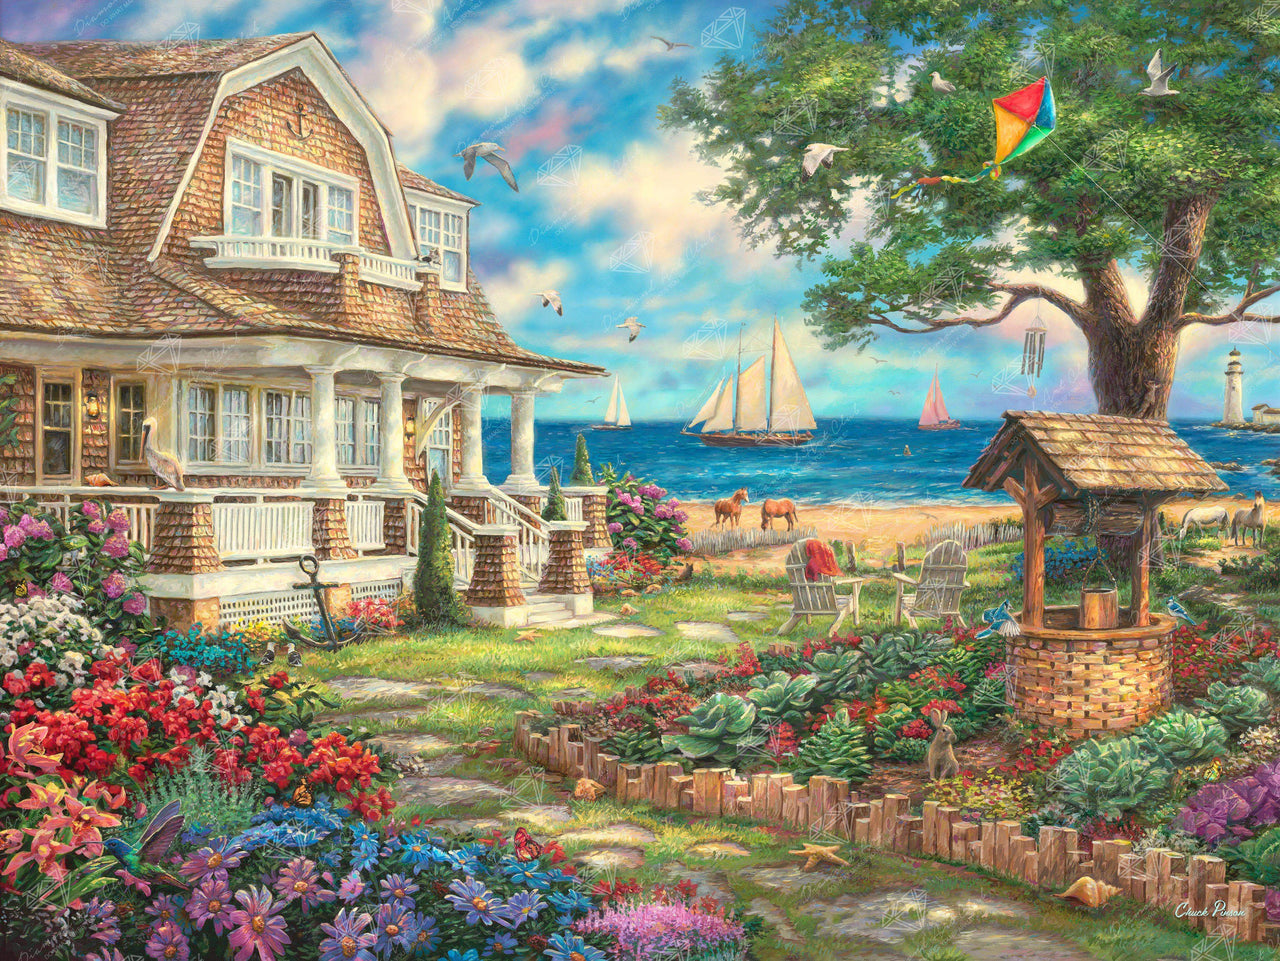 Diamond Painting Sea Garden Cottage 36.6" x 27.6" (93cm x 70cm) / Square With 61 Colors Including 4 ABs / 102,213